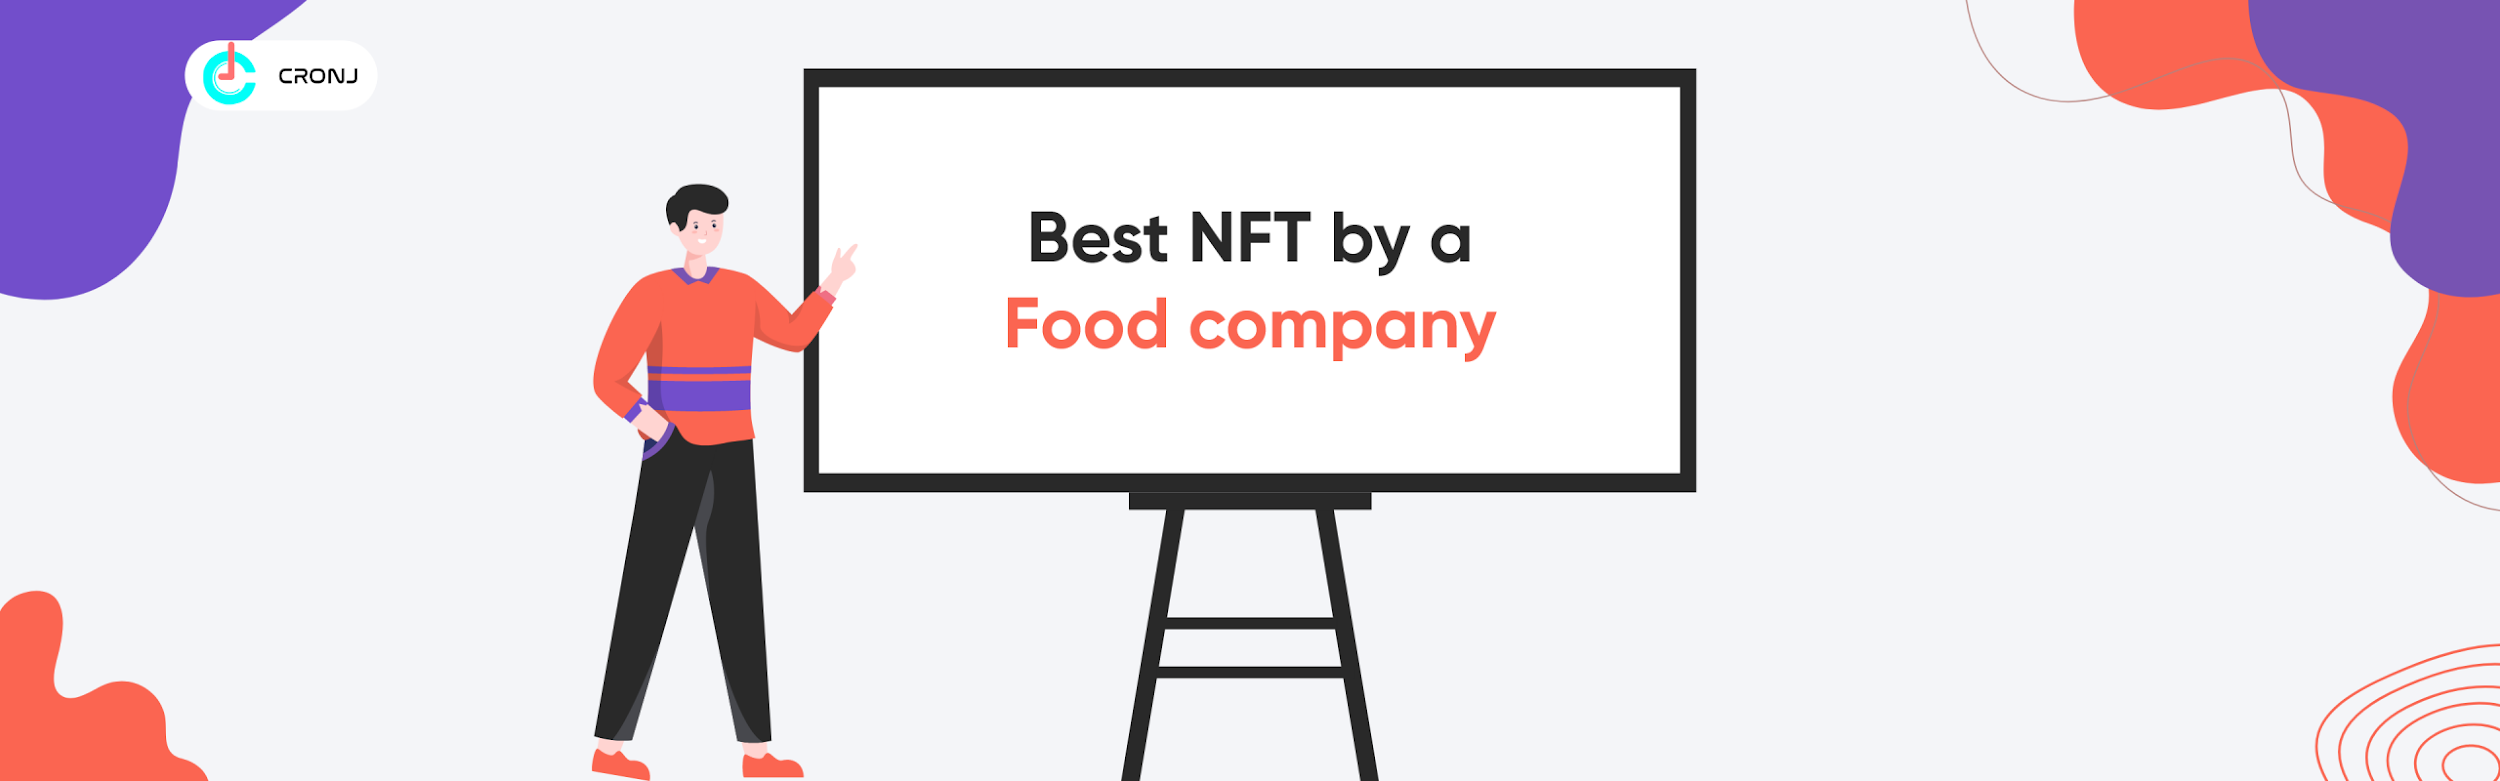 Best NFT by a Food Company